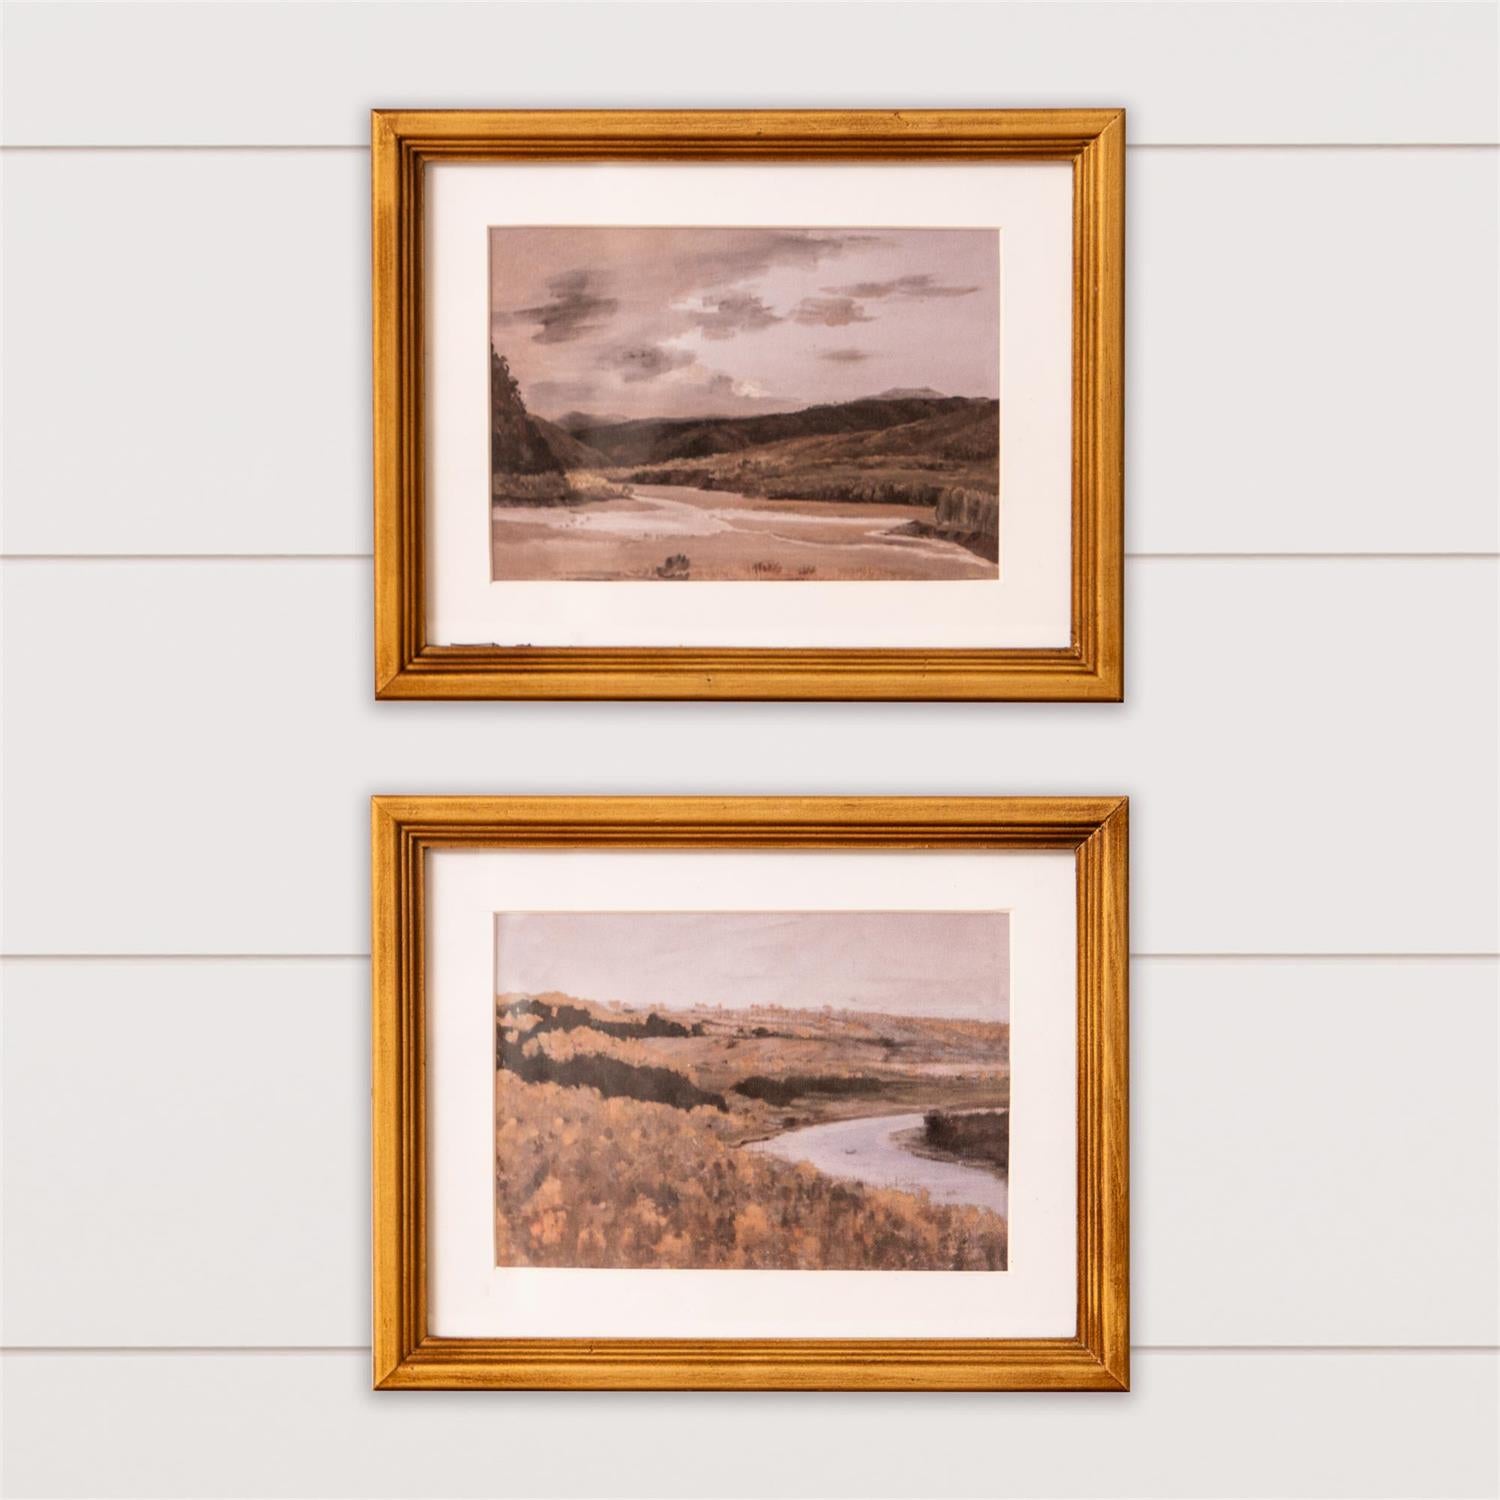 Small Antique Gold Framed Prints - Matted Valley Landscapes